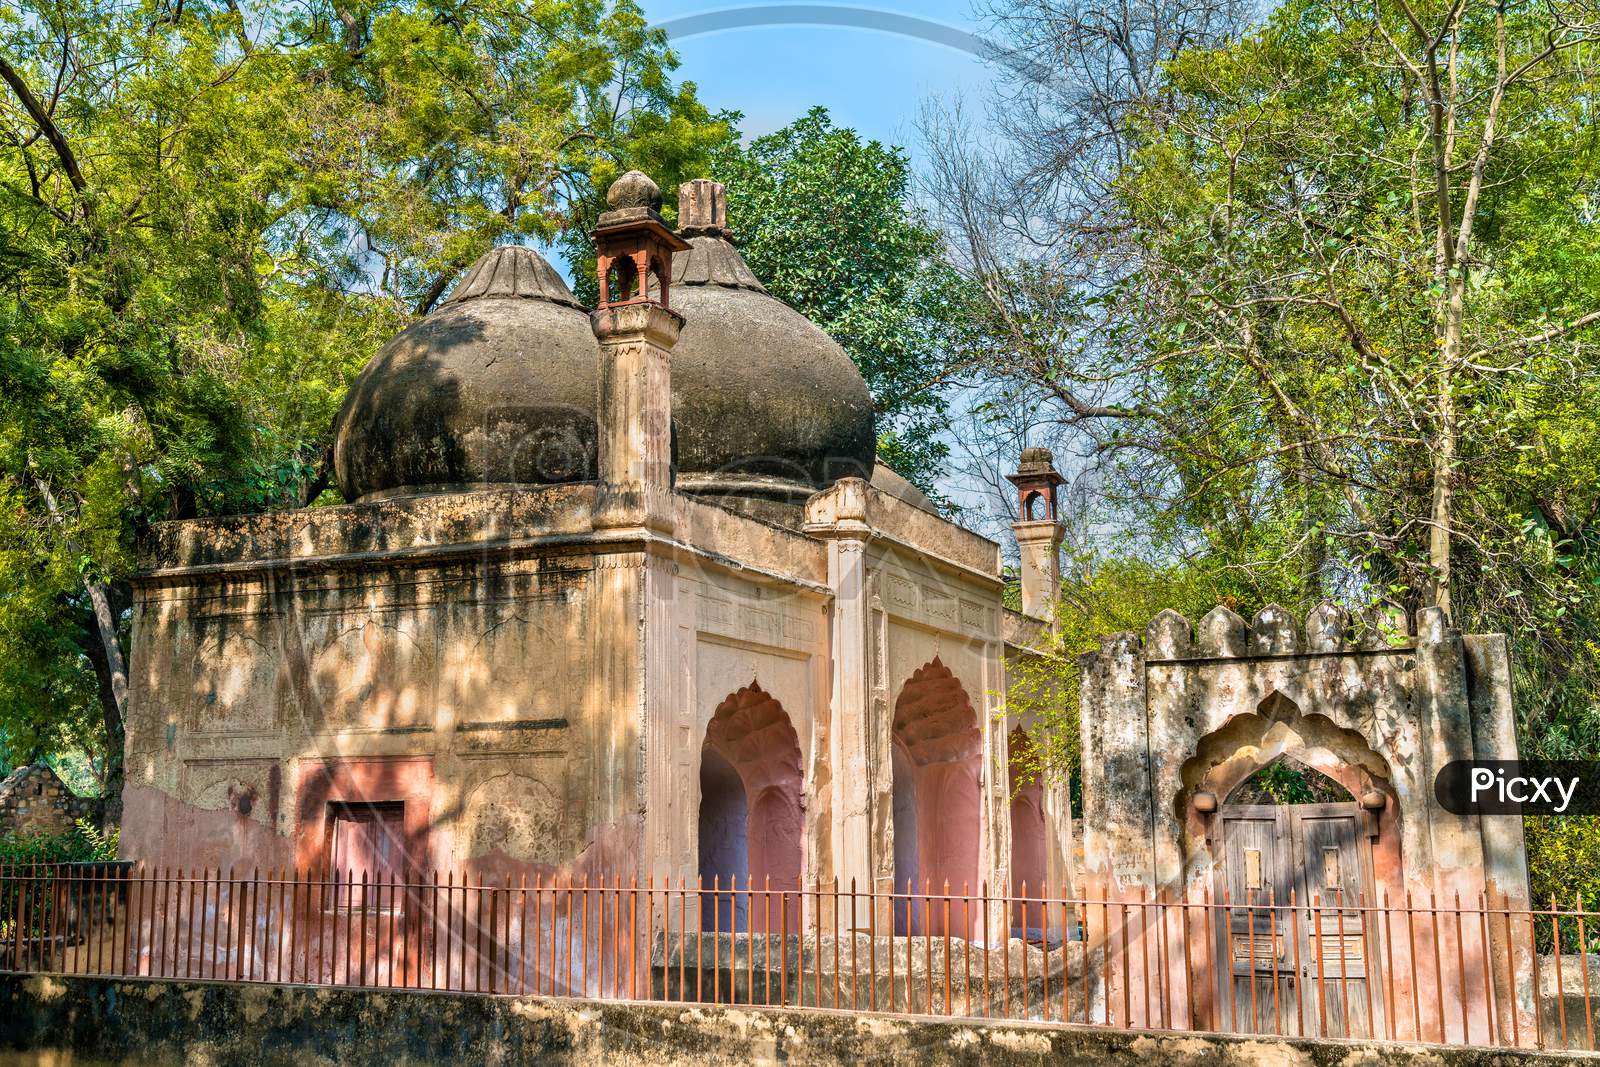 East Gate Of The Humayun Tomb Complex In Delhi, India